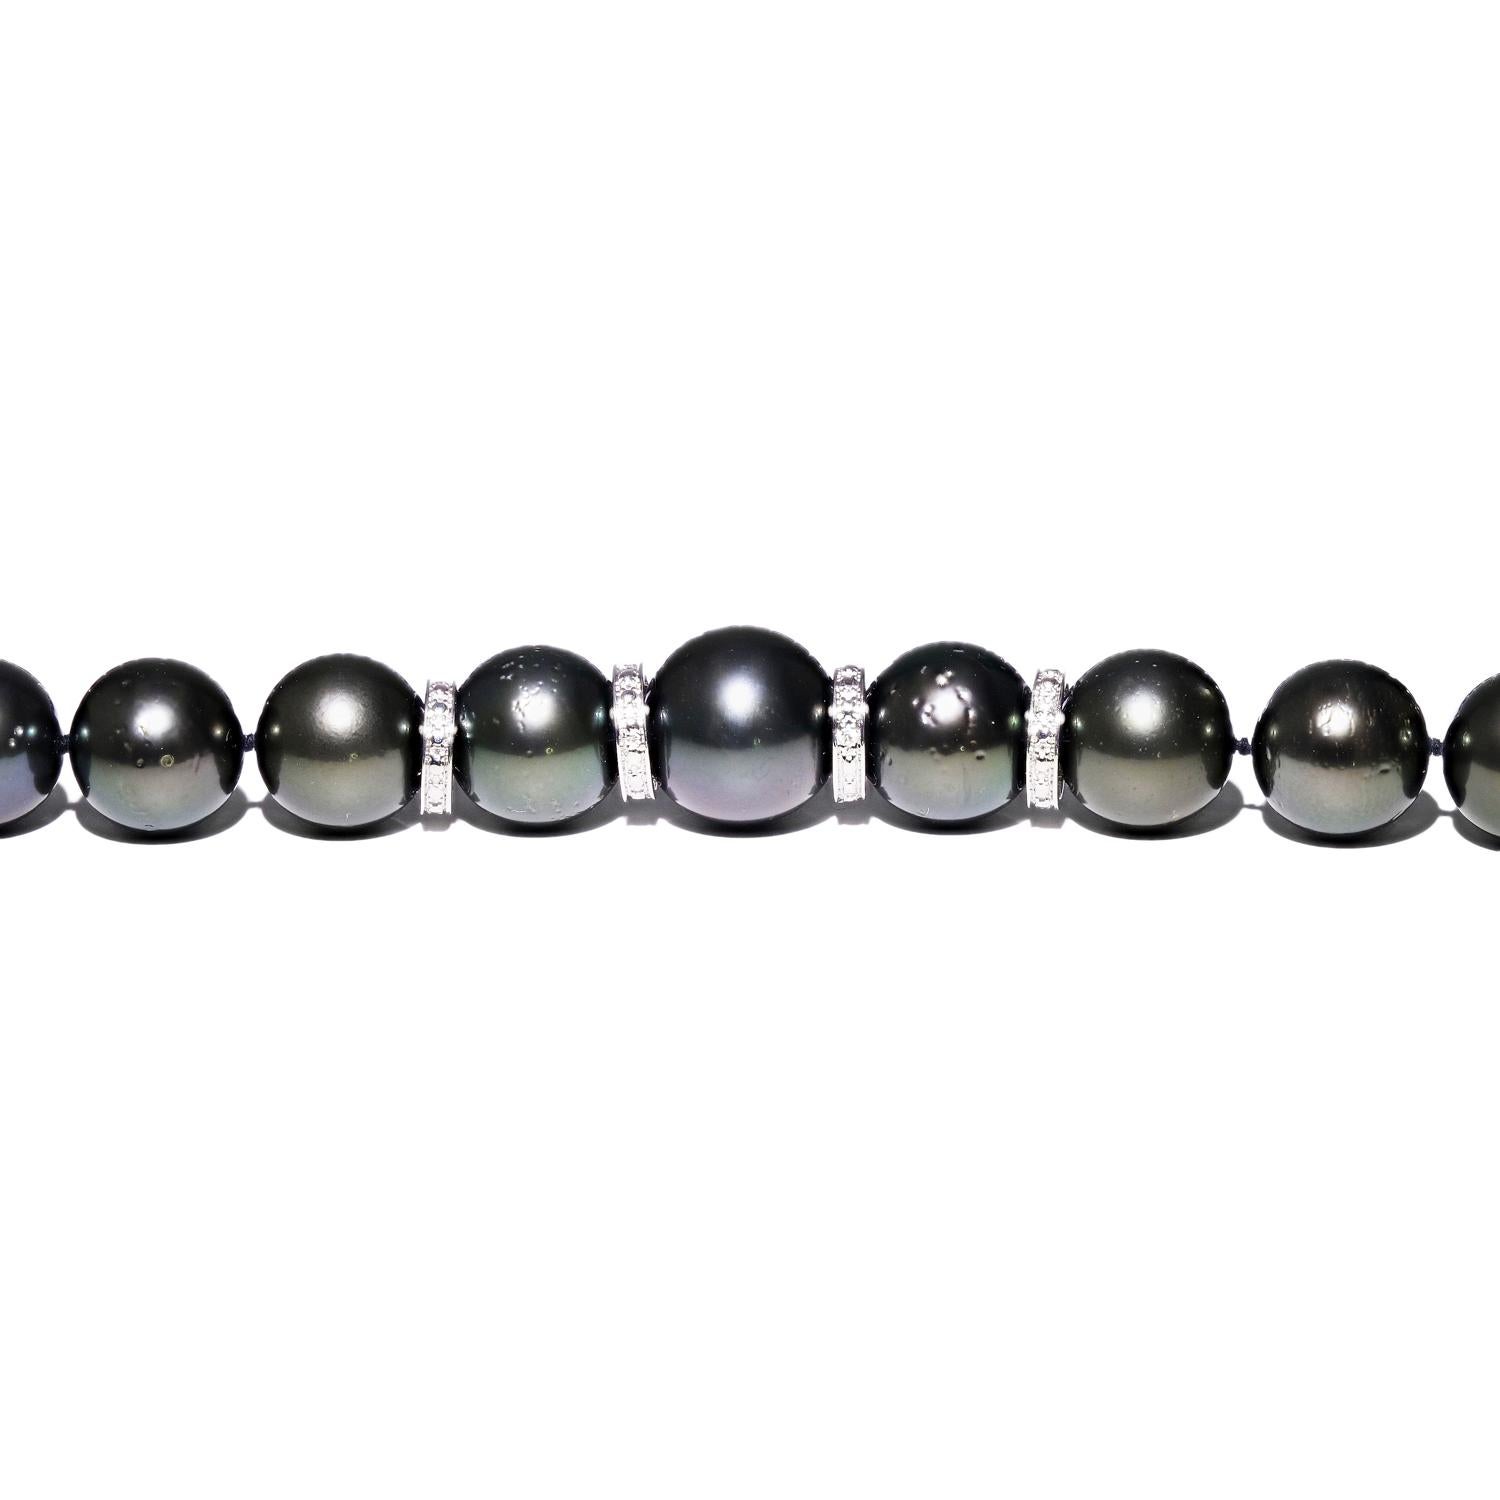 One graduated, single strand Cultured Tahitian Pearl necklace. The strand has each pearl individually hand knotted and measures 17.5 inches in length. The necklace is finished with four 2mm wide 14K white gold spacers set with genuine round diamonds